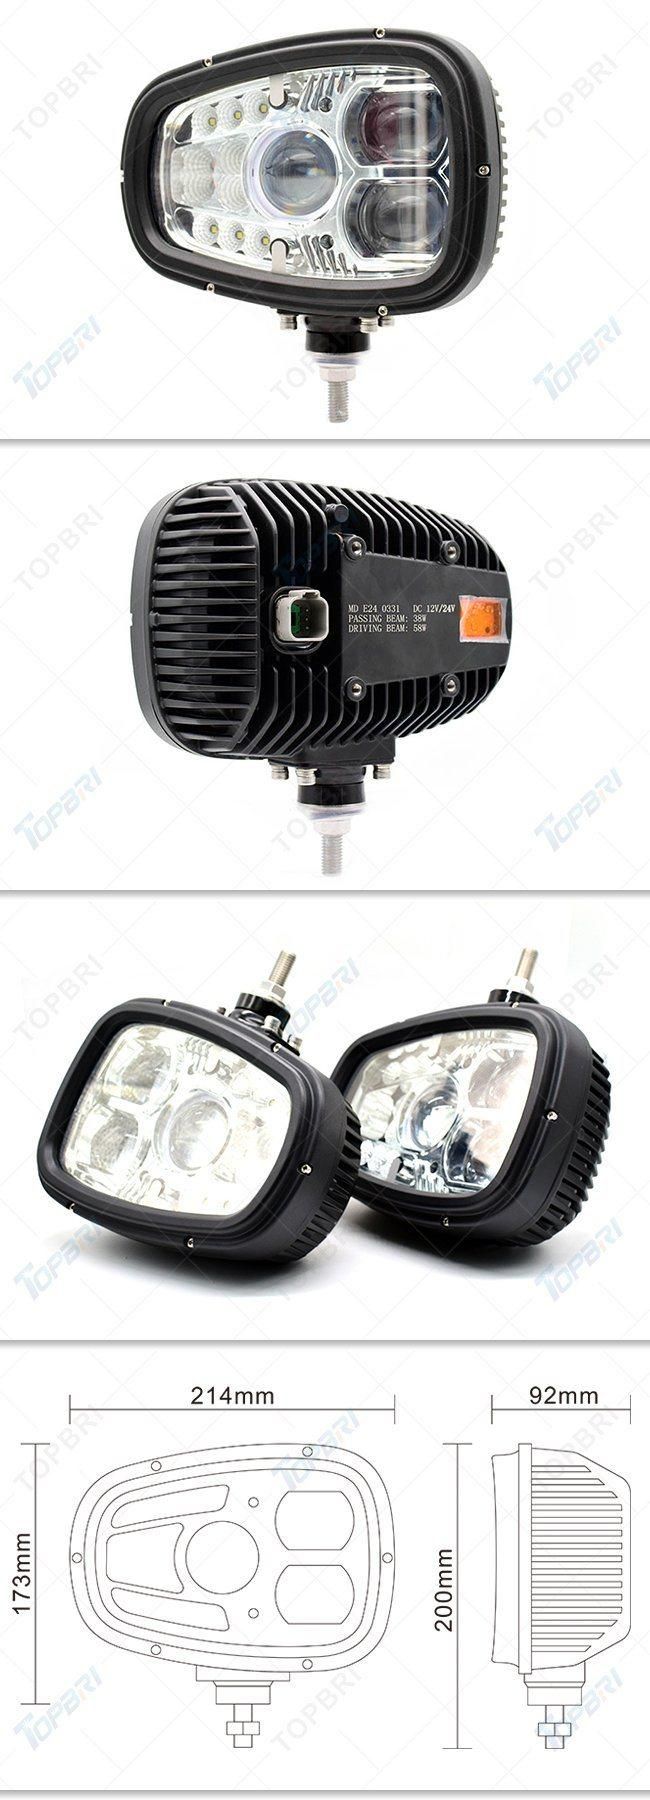 Wholesale R23 9inch 96W Laser LED Work Driving Car Lights for Trailer Truck Heavy Duty Indicator